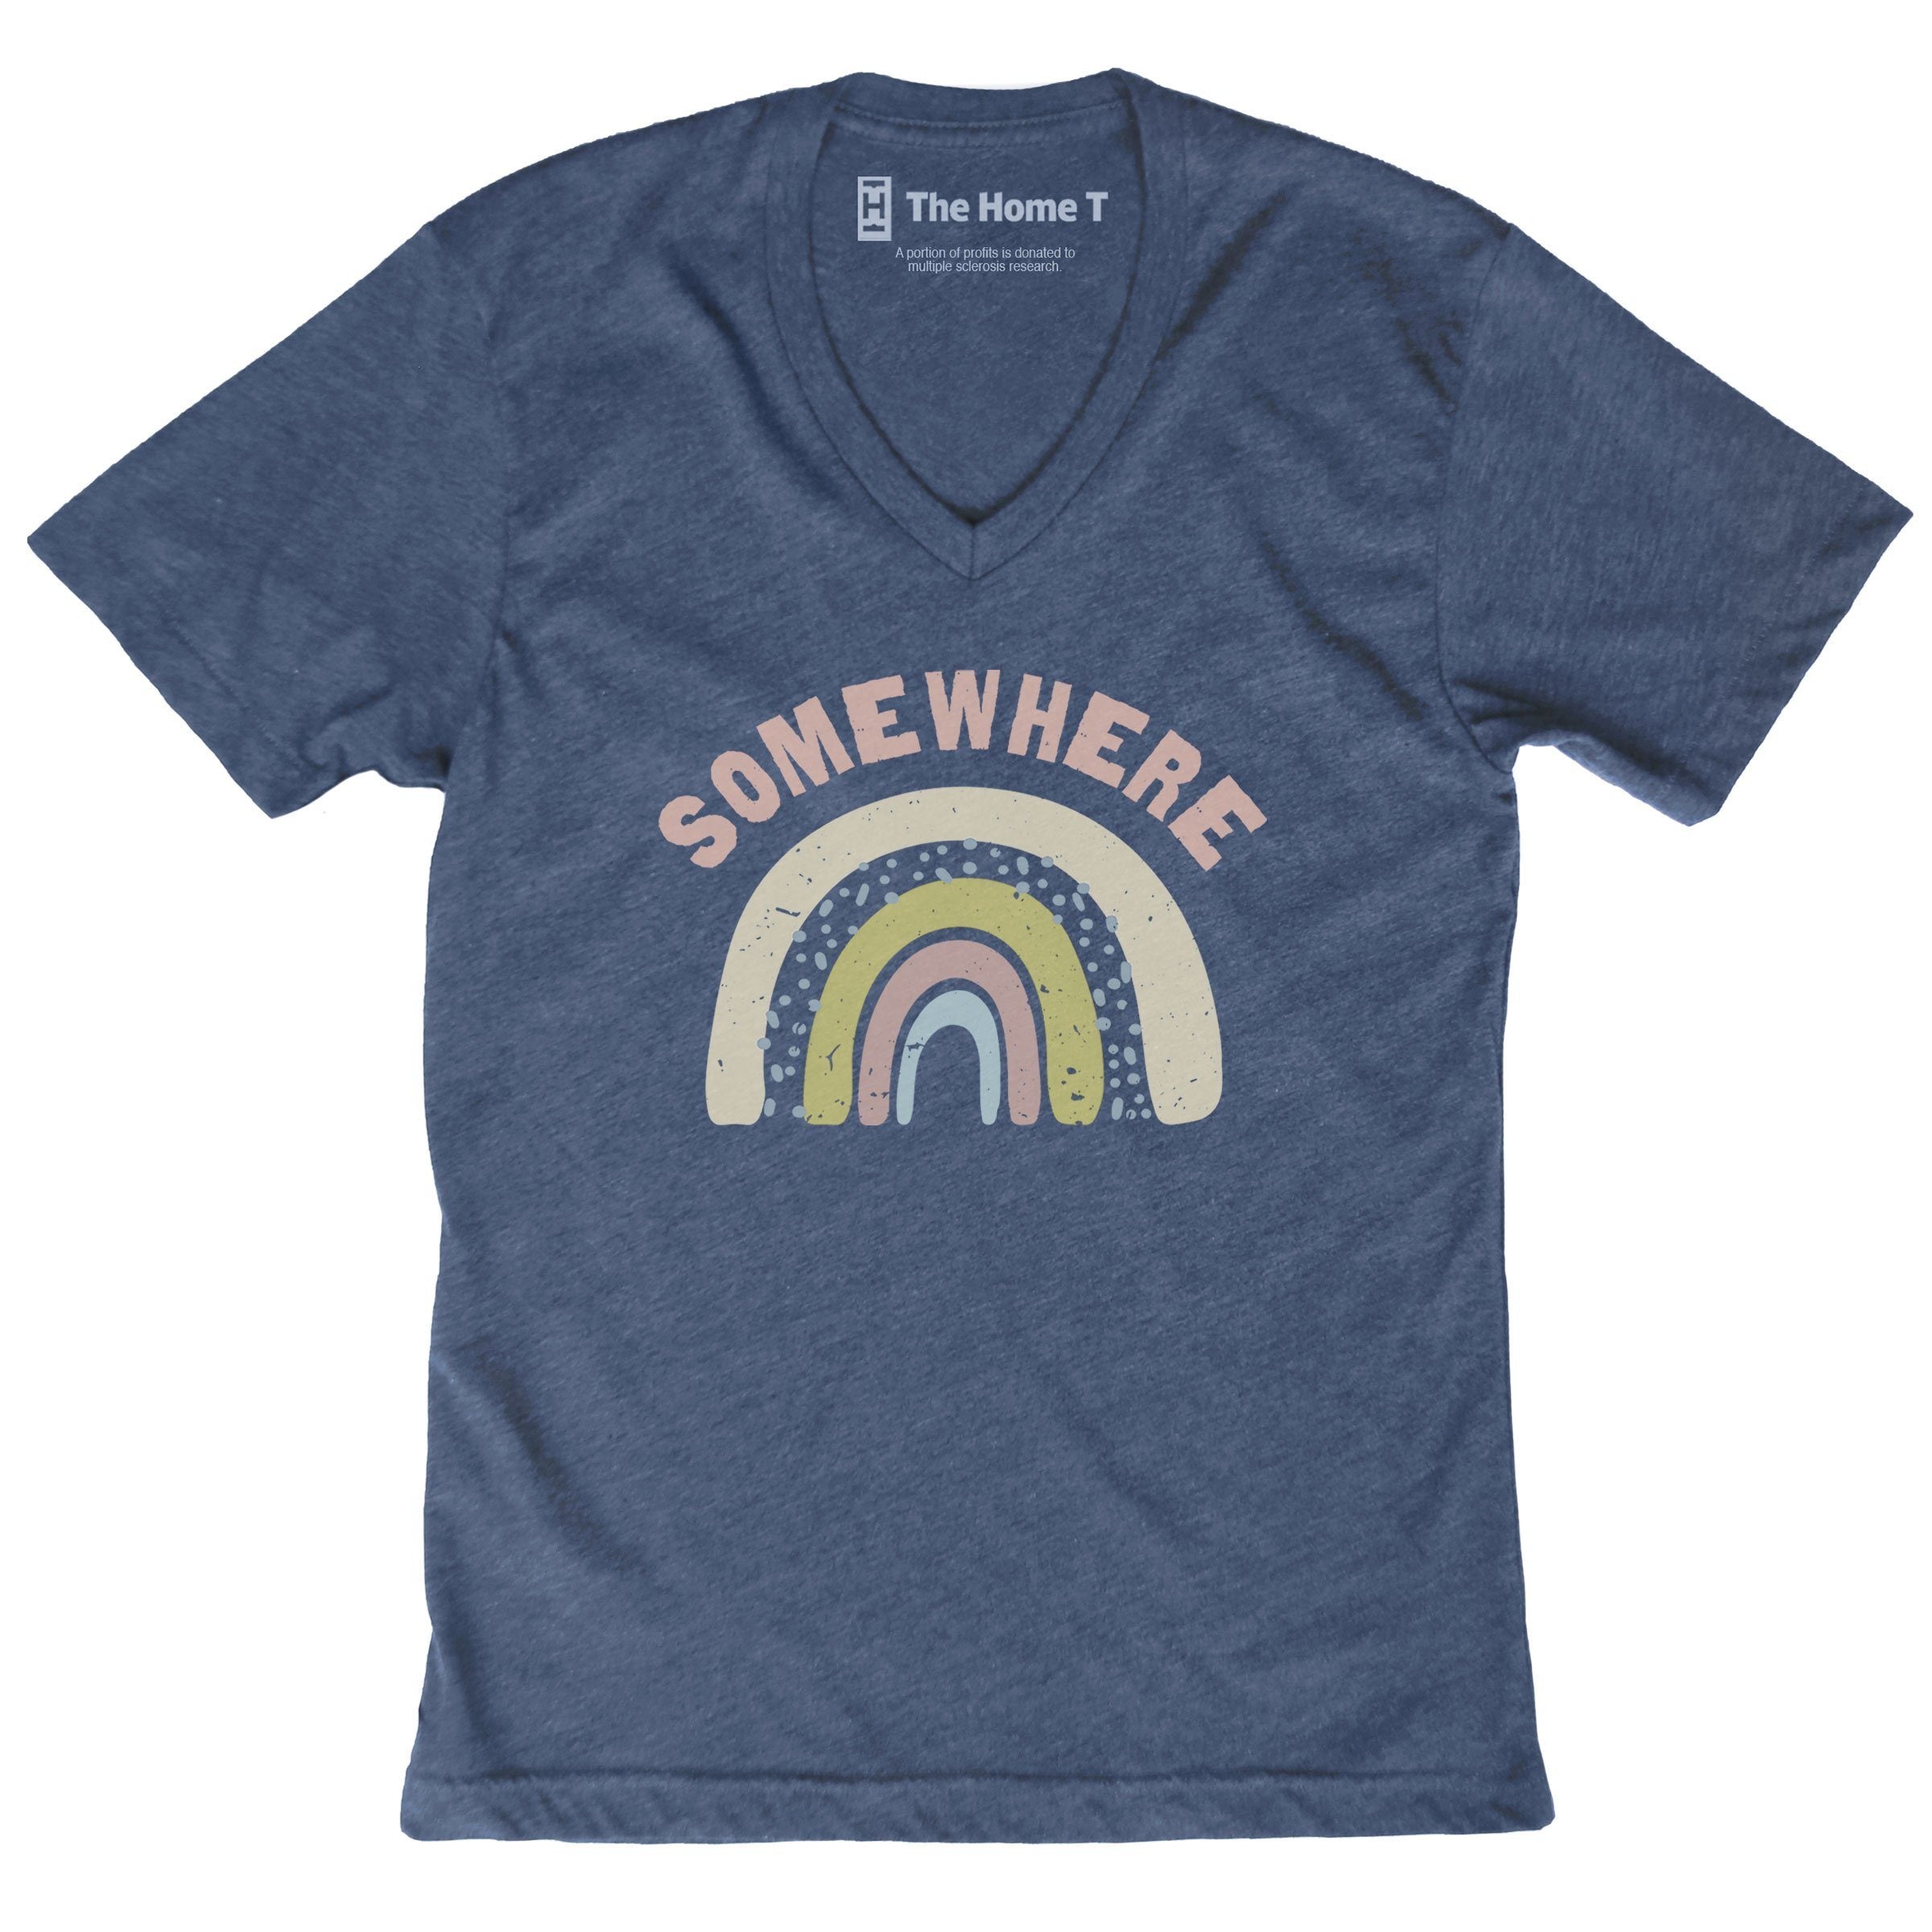 Somewhere Over the Rainbow The Home T XS V-Neck